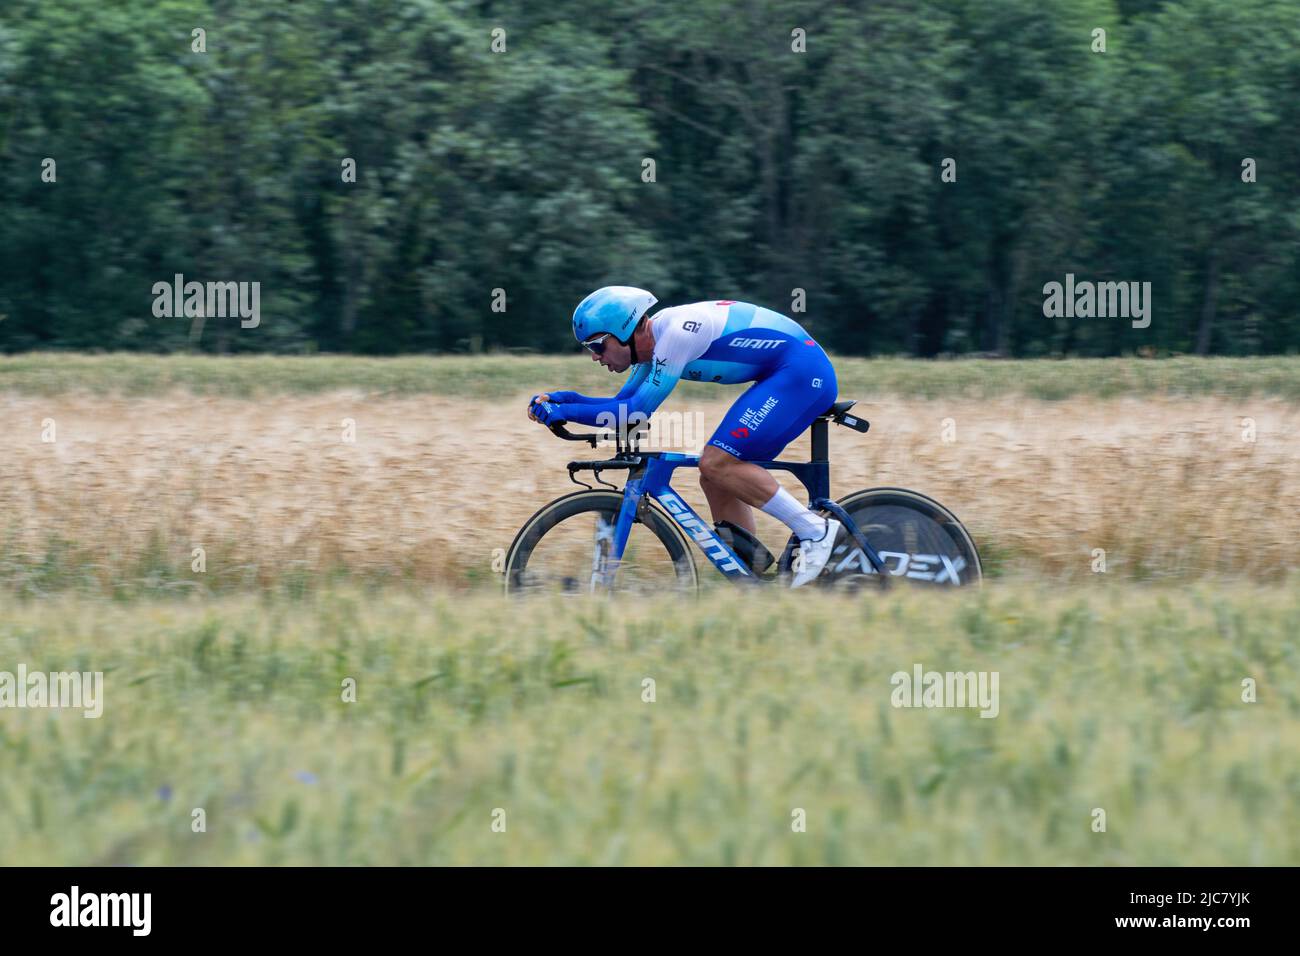 Montbrison, France. 08th June, 2022. Dylan Groenewegen (Bike Exchange - Jayco Team) seen in action during the 4th Stage of Criterium du Dauphine 2022. The fourth stage of the Criterium du Dauphine Libere is an individual time trial with a distance of 31.9 km between Montbrison and La Bâtie d'Urfé in the Loire department. The winner of the stage is Filippo Ganna (Ineos Grenadiers Team) in 35mn 32s. He is ahead of Wout Van Aert (Jumbo Visma Team), 2nd at 2s, and Eythan Hayter (Ineos Grenadiers Team) at 17s. Credit: SOPA Images Limited/Alamy Live News Stock Photo